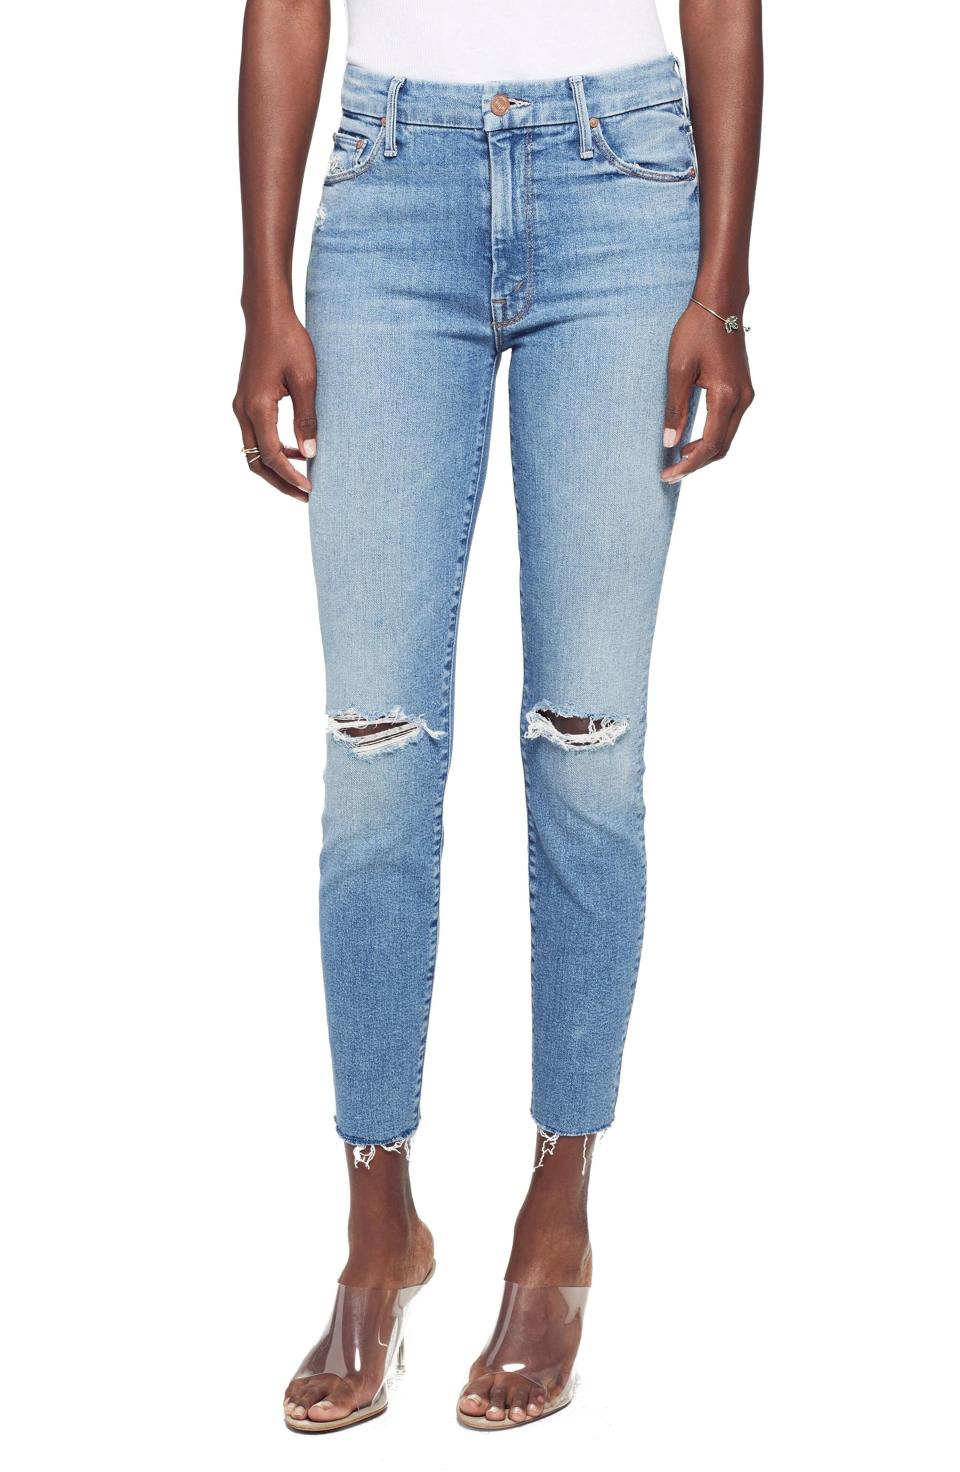 2) Looker Ripped High Waist Fray Ankle Skinny Jeans